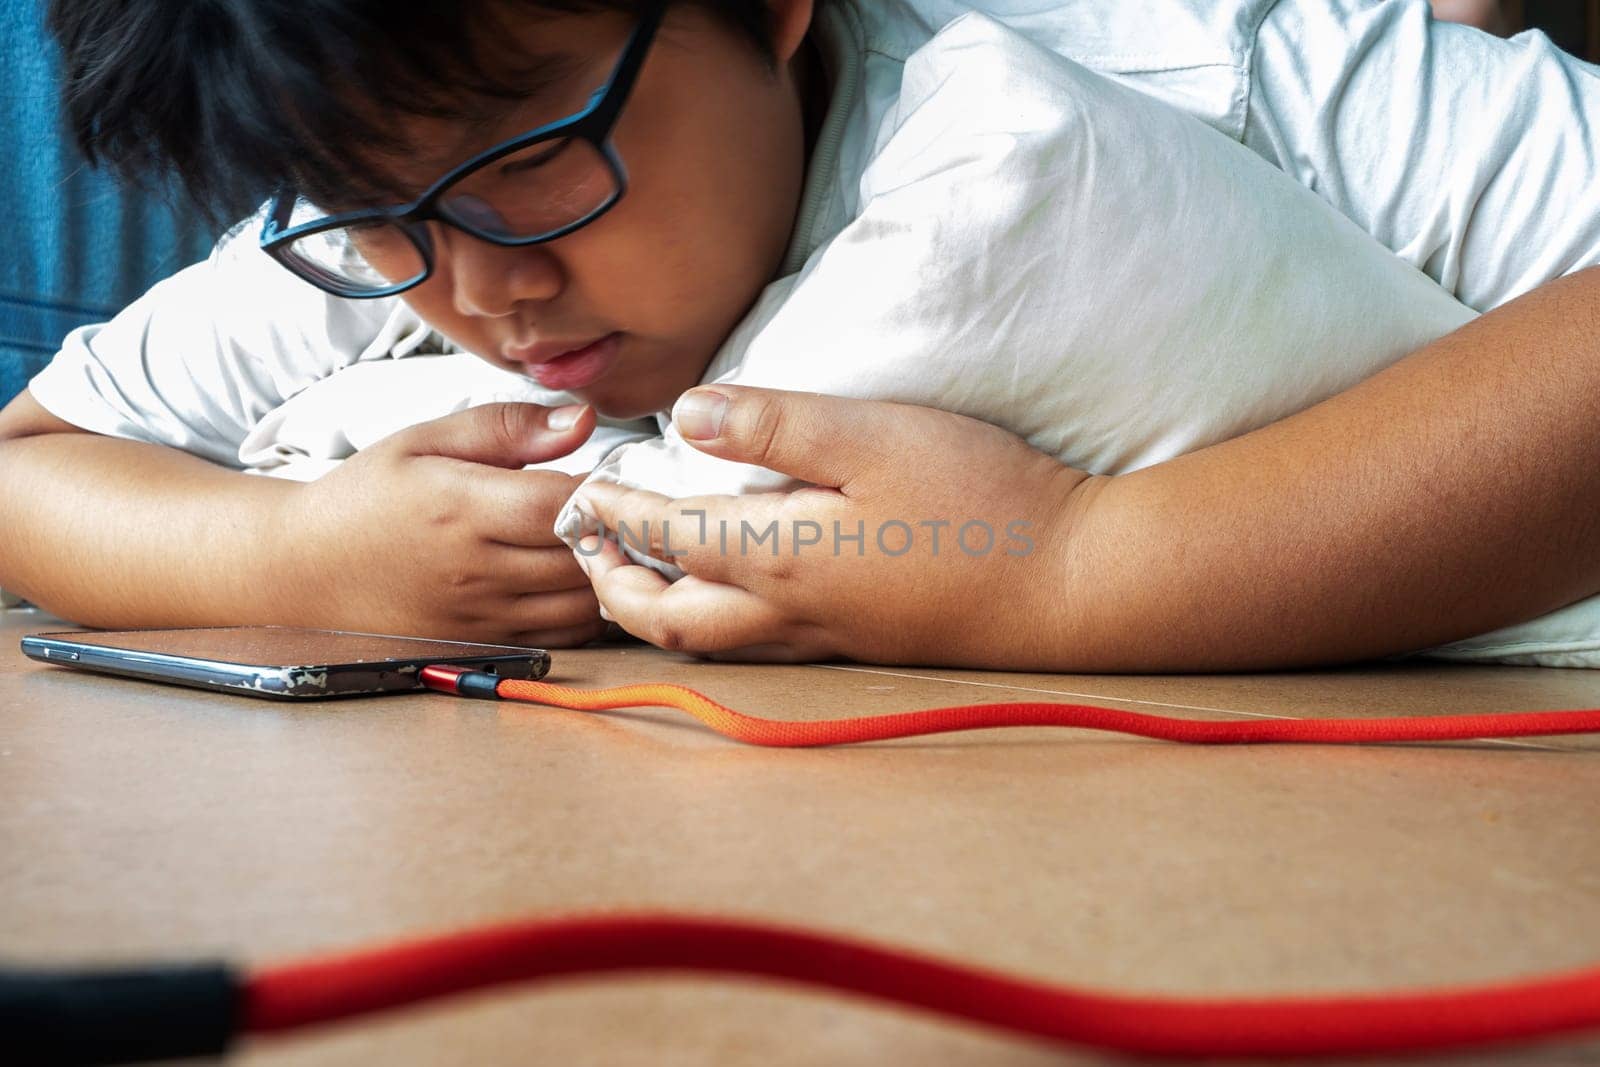 An Asian boy lies prone while seeing media on a smartphone